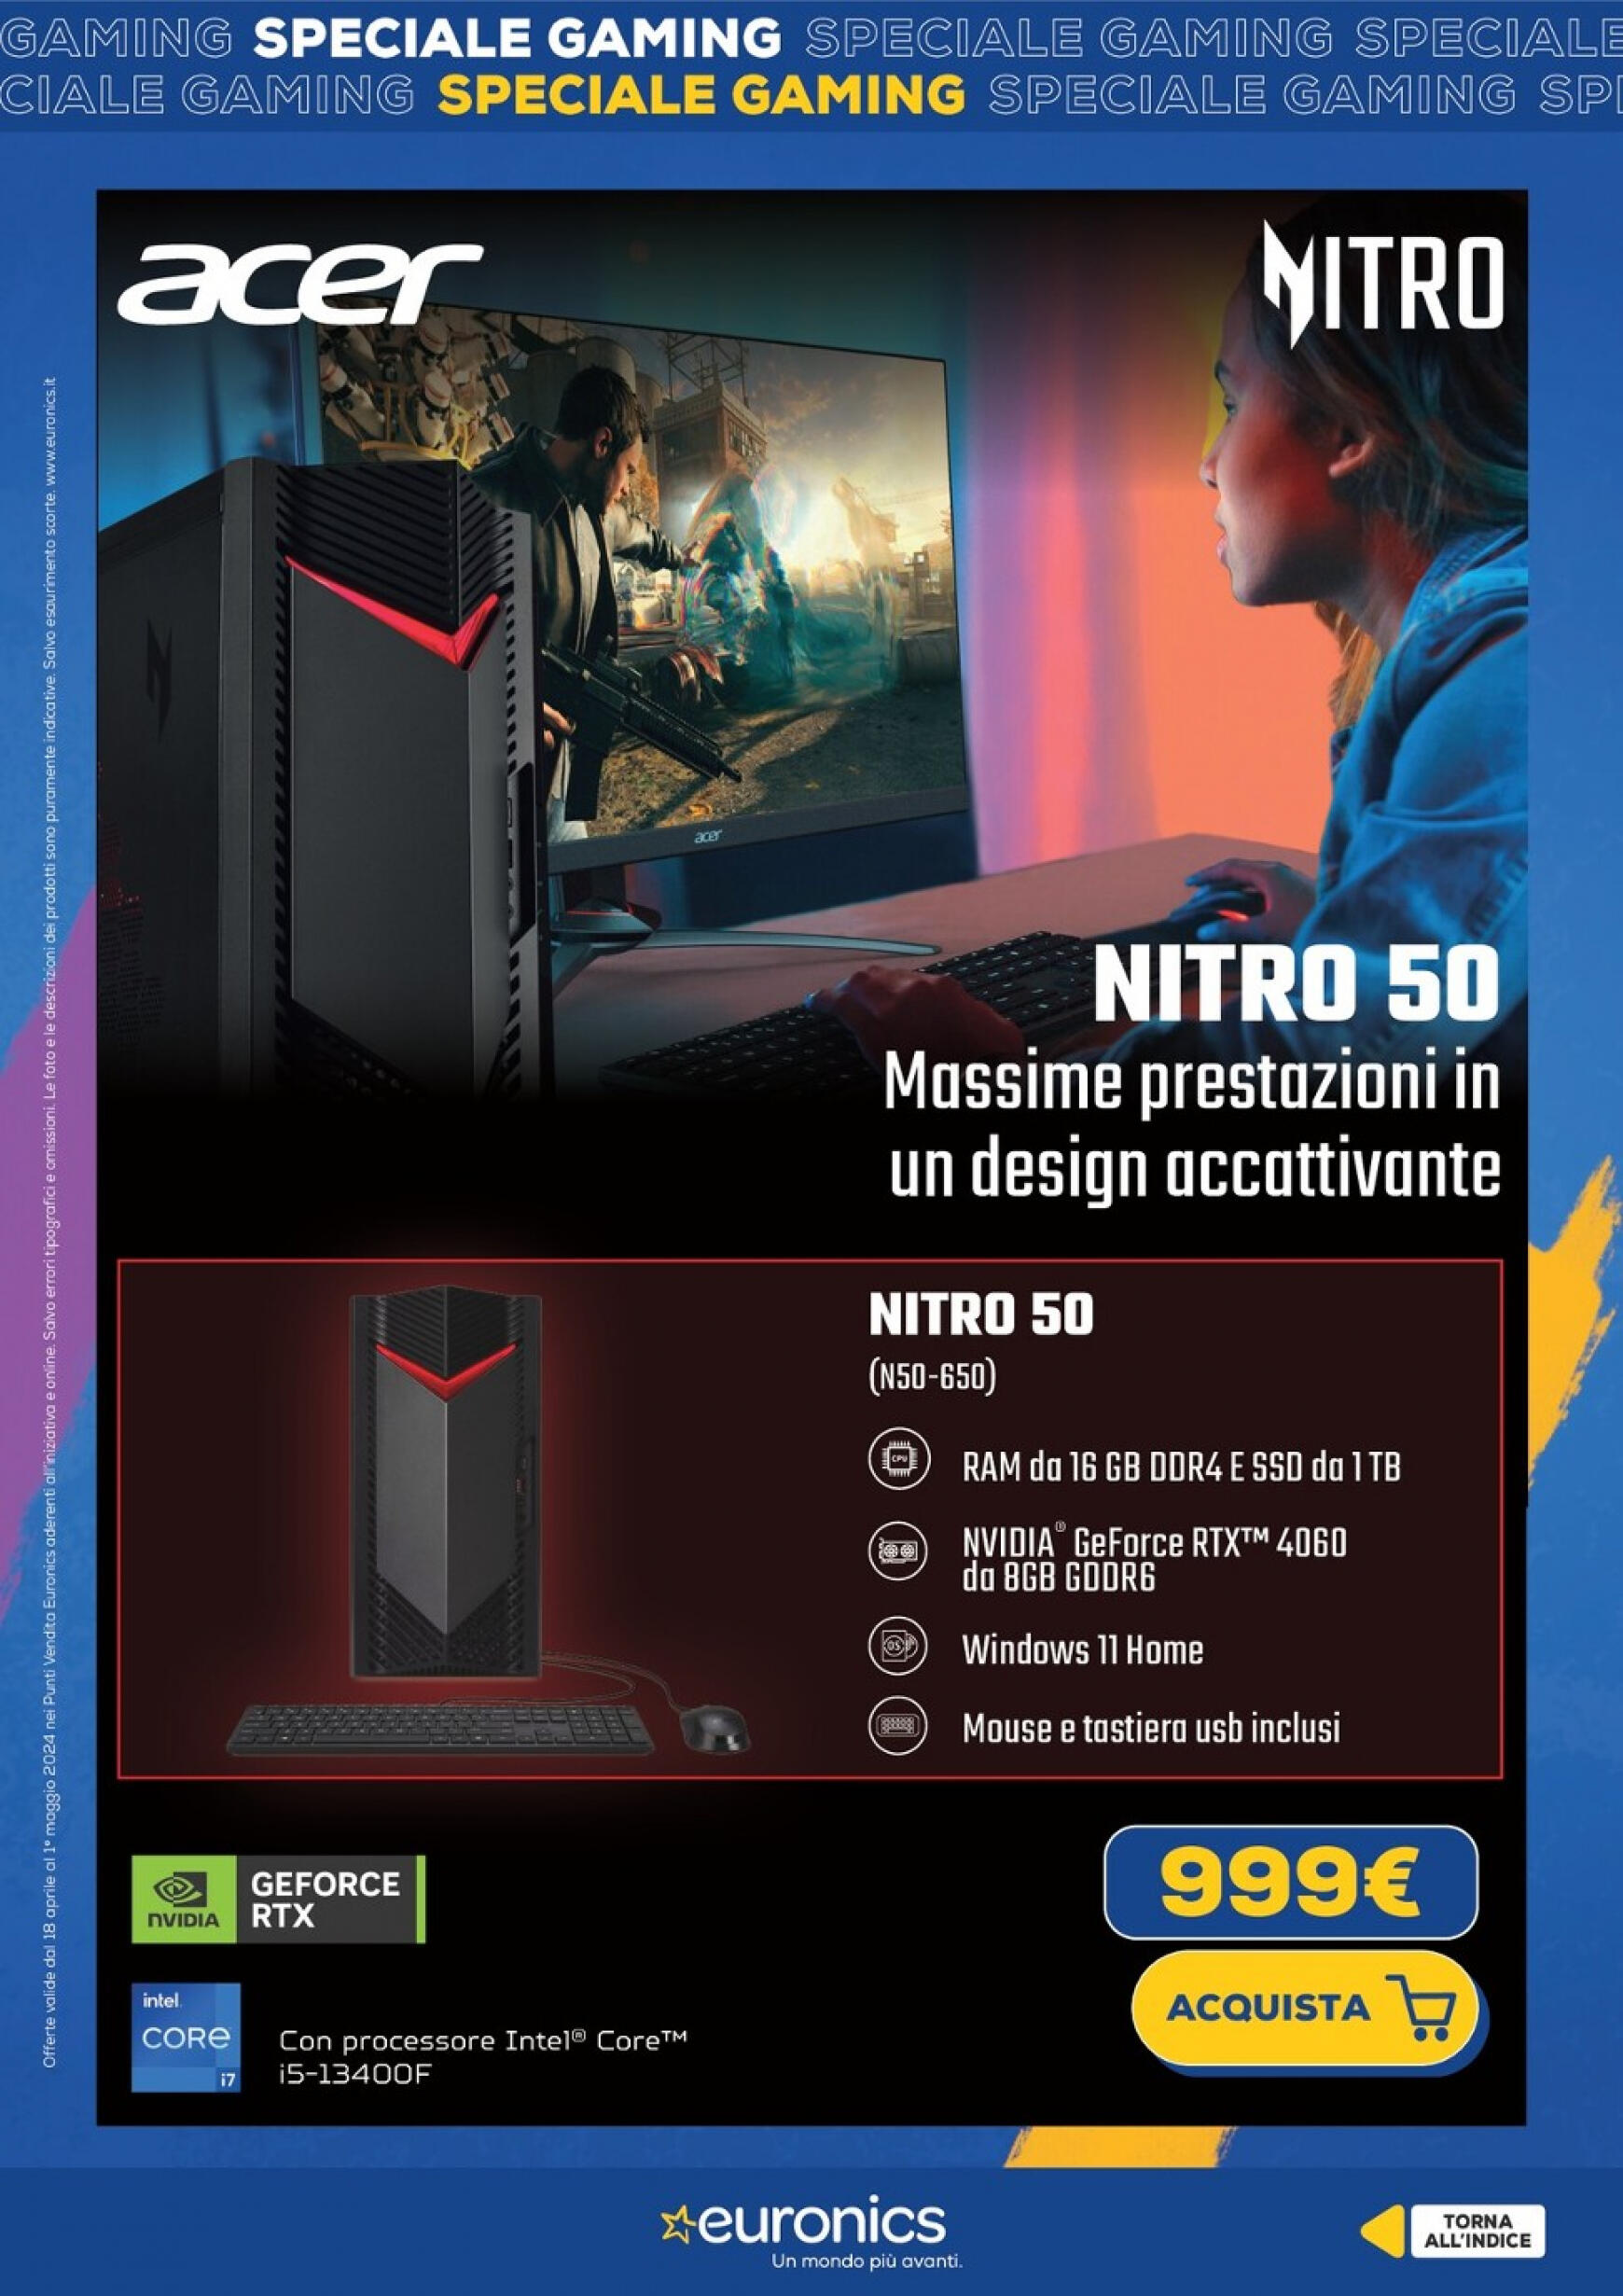 euronics - Nuovo volantino Euronics - Speciale Gaming 18.04. - 01.05. - page: 5